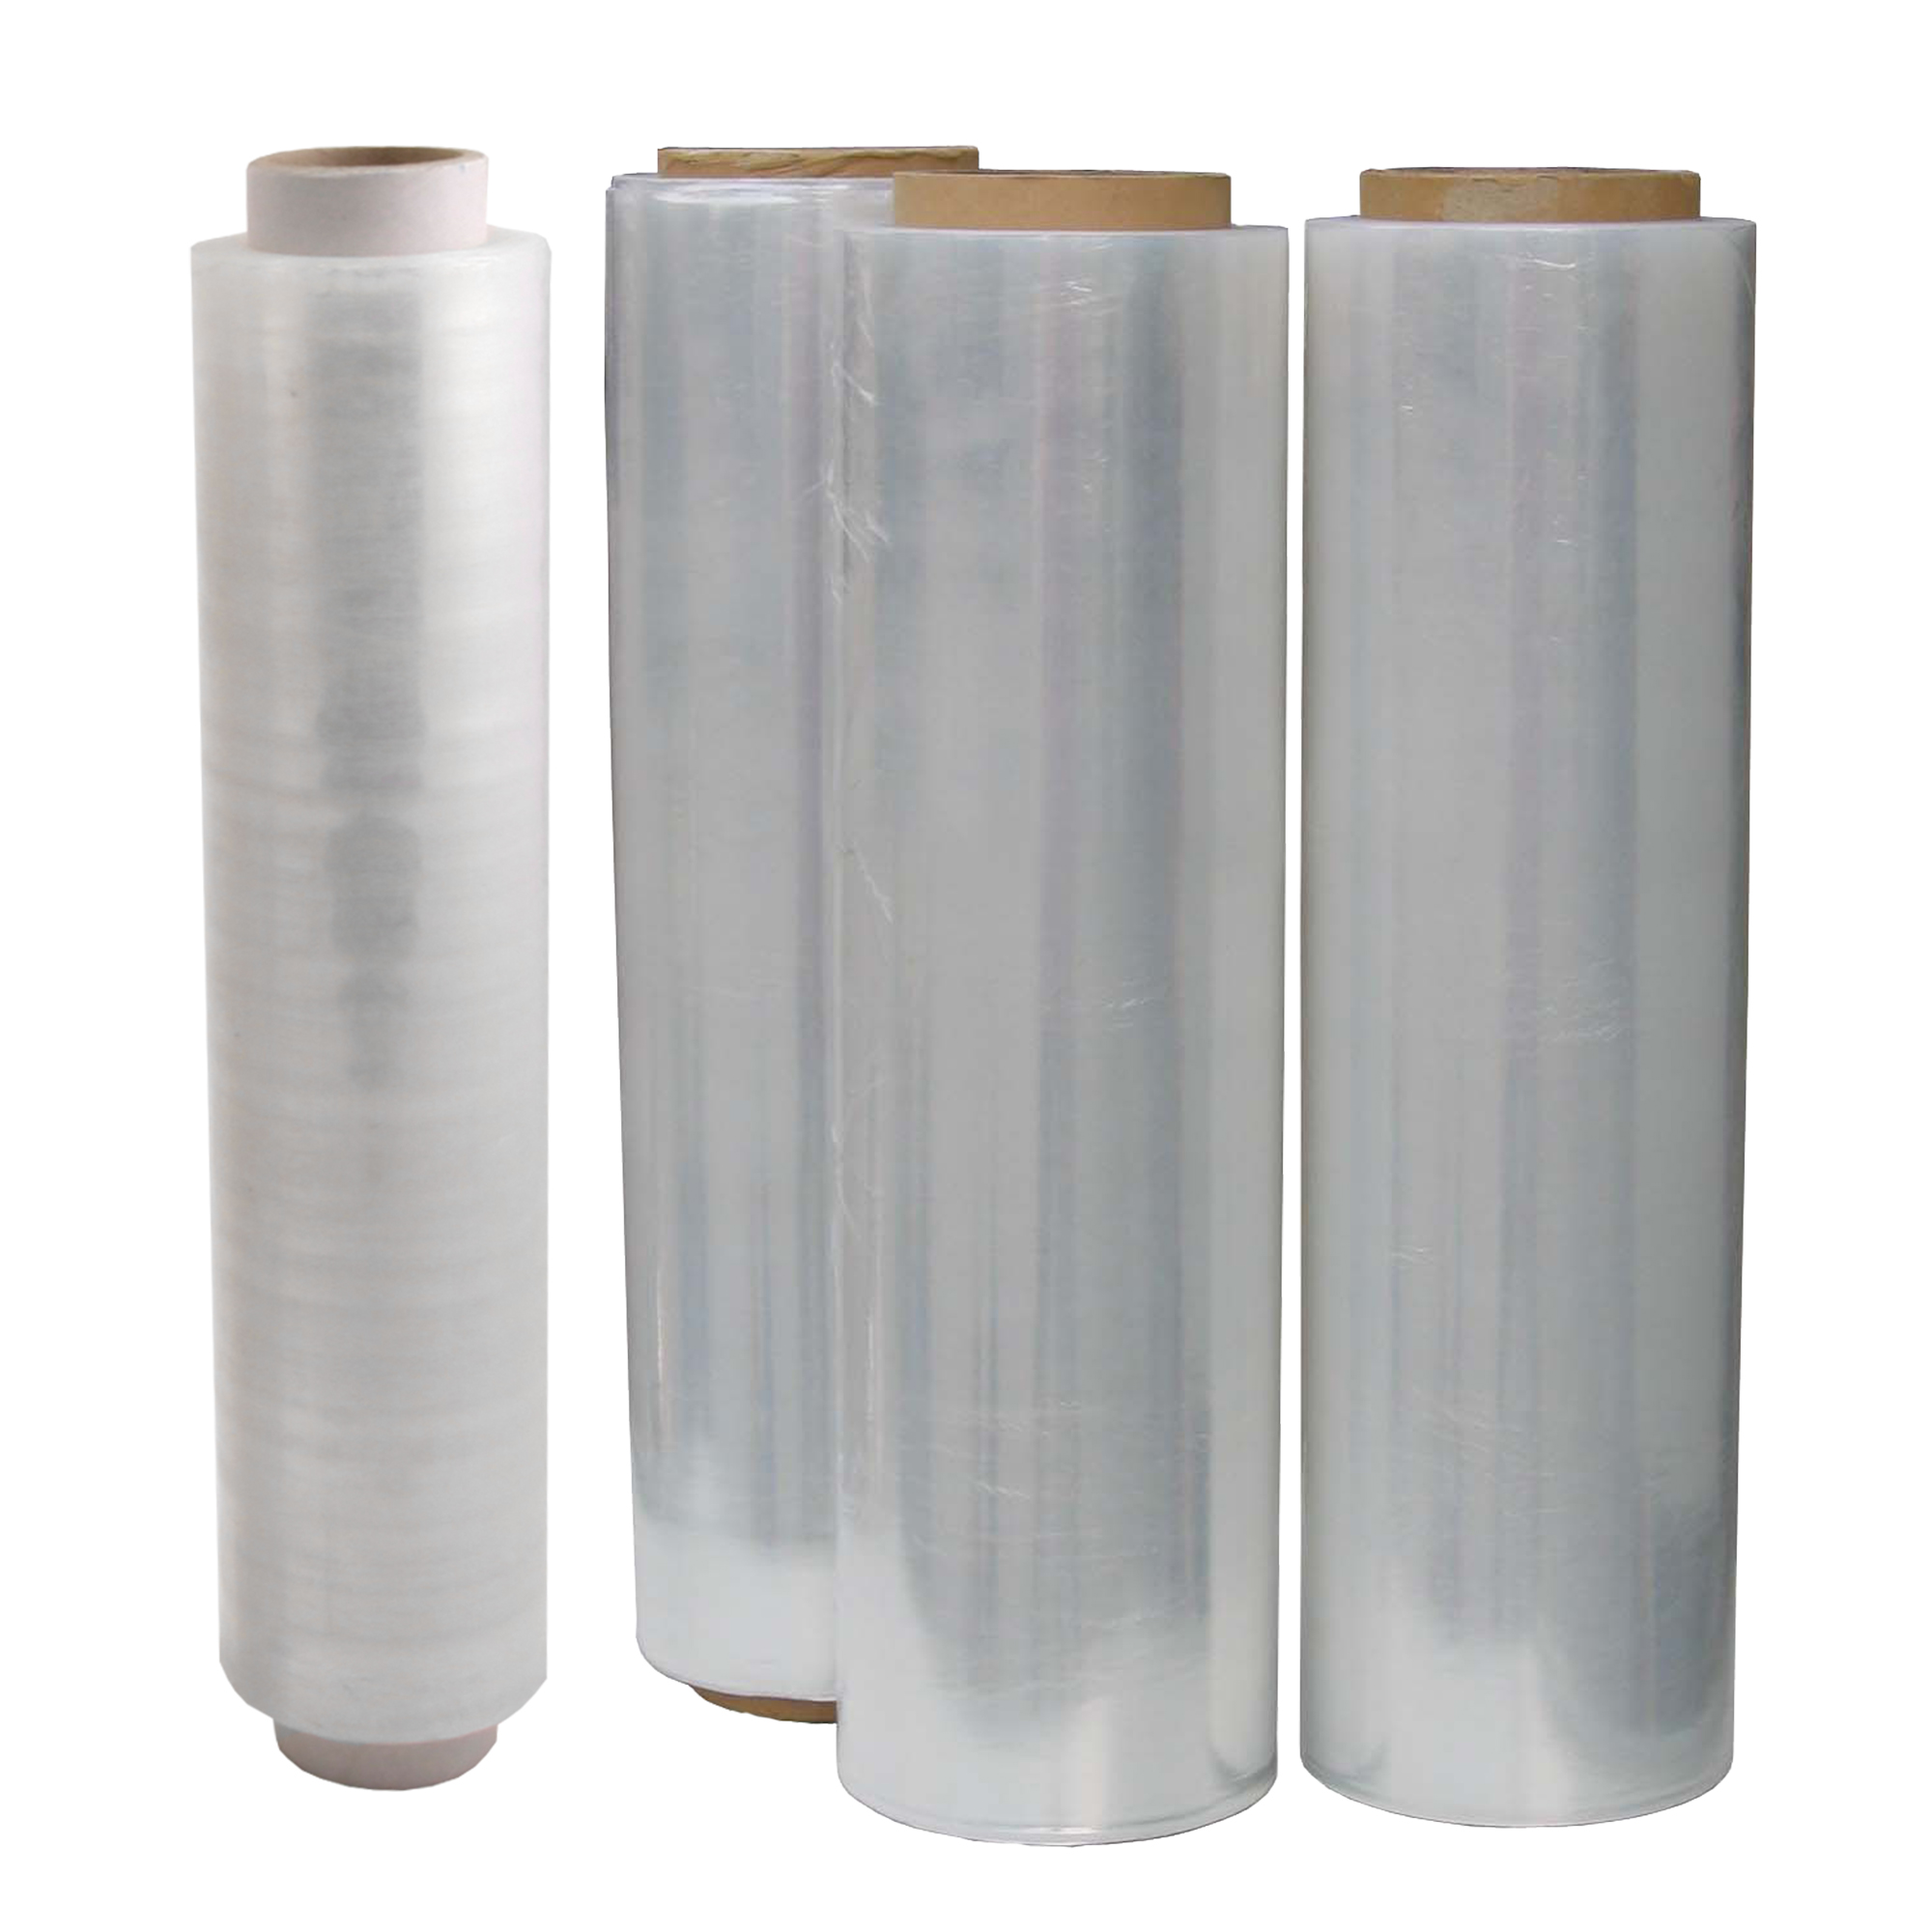 Birotics and Stationary/Stationery and Office Supplies/Stretch Film Wrap